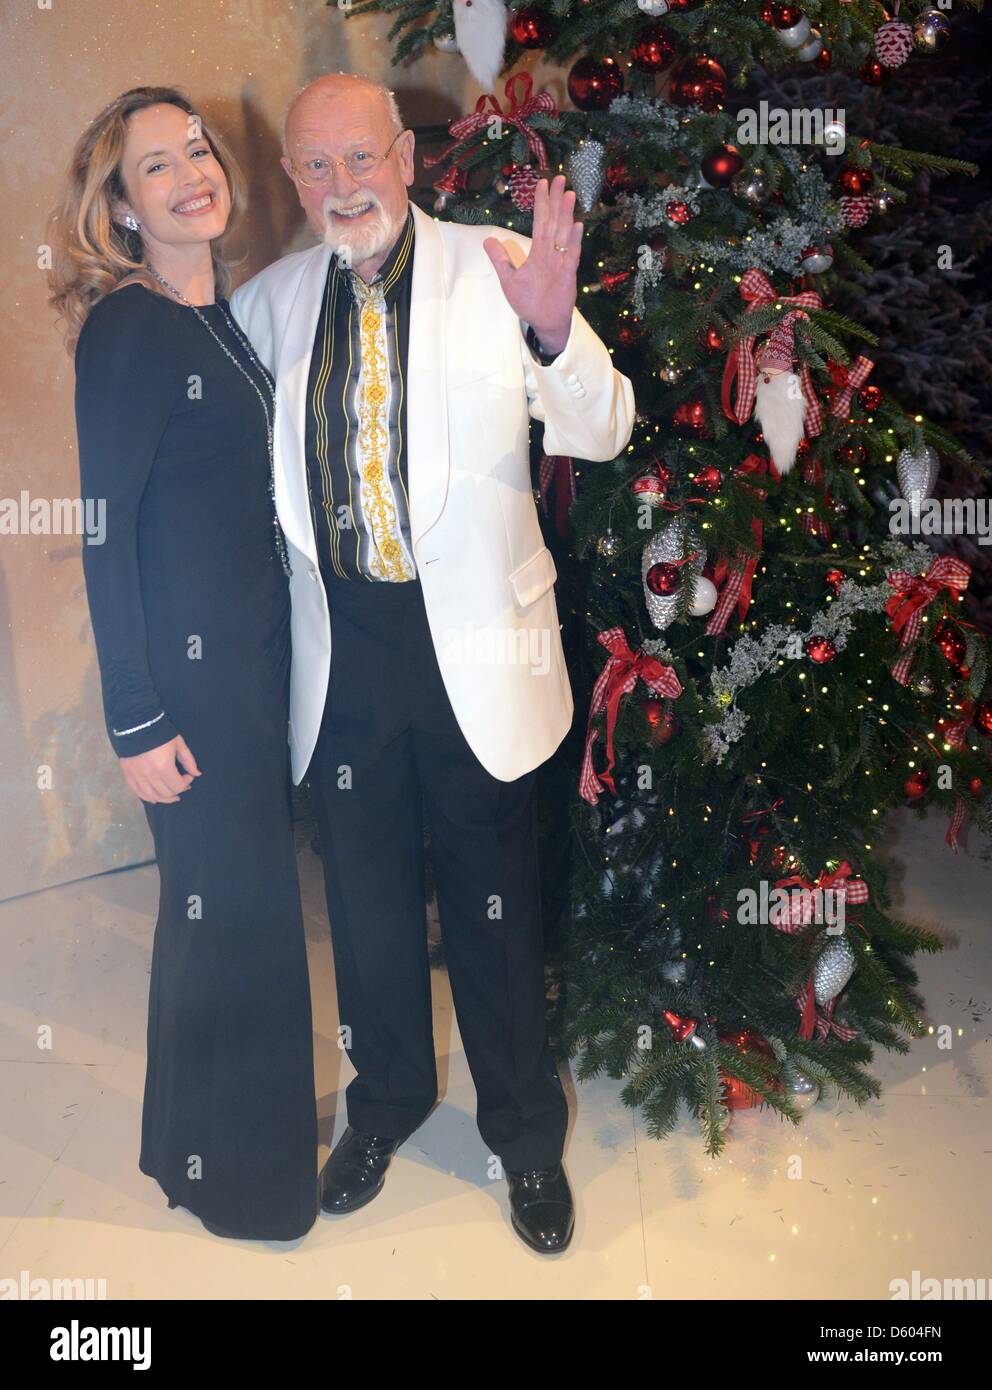 Singer Roger Whittaker and his daughter Jessica after recording a Christmas show in Hessian Broadcasting Corporation at the Europapark in Rust, Germany, 06 November 2012. The show will be broadcasted on 02 December. Photo: Patrick Seeger Stock Photo